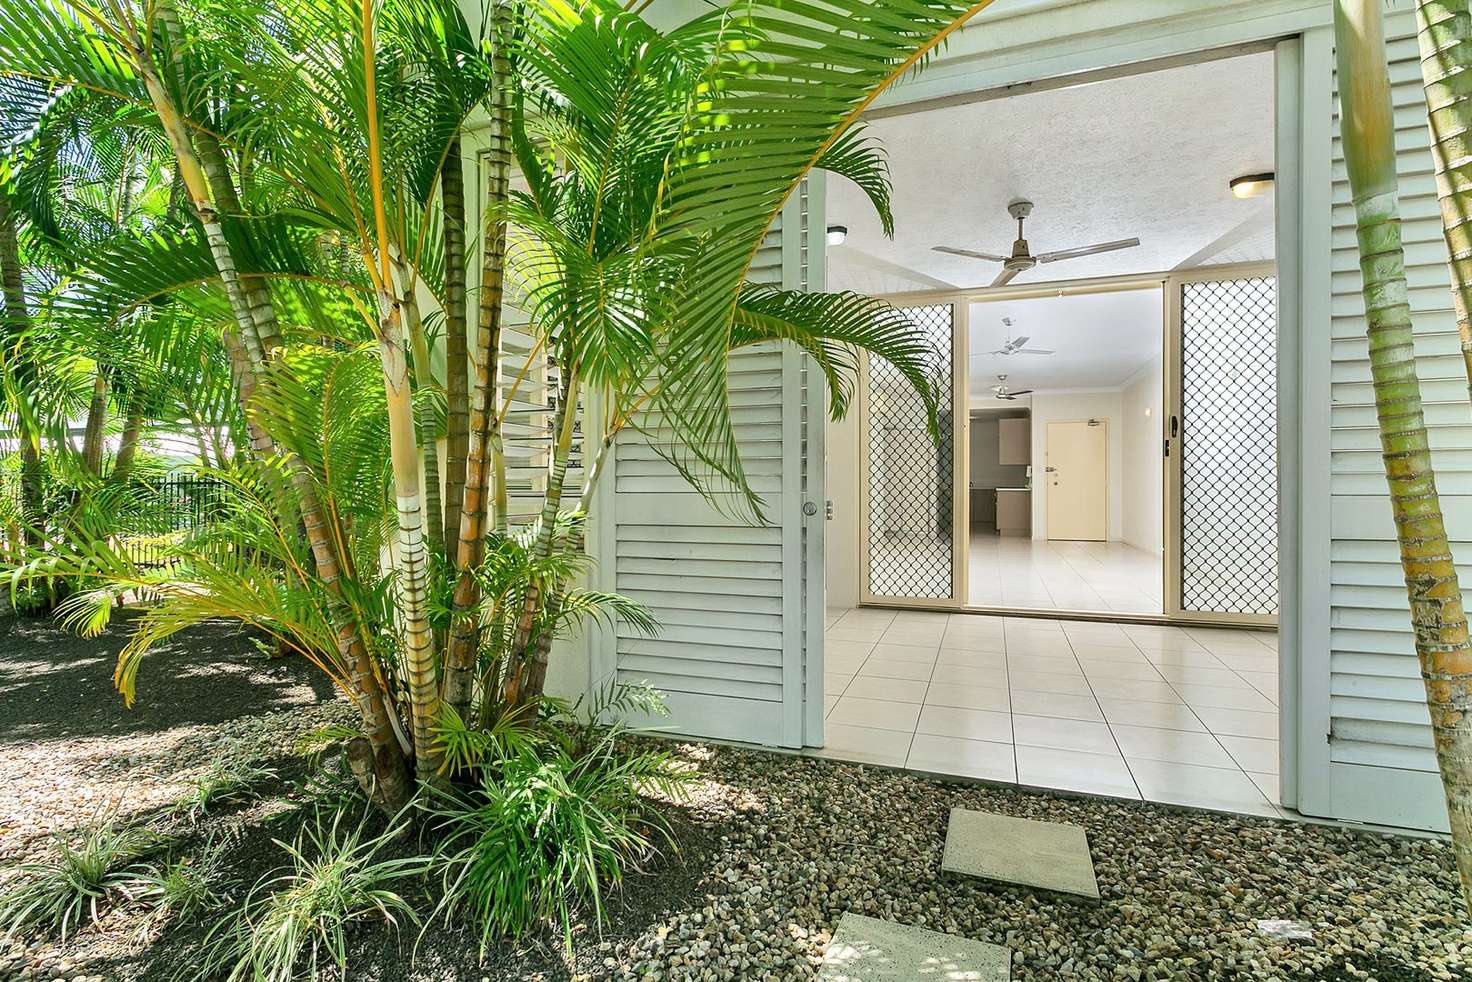 Main view of Homely unit listing, 27/164 Spence Street, Bungalow QLD 4870